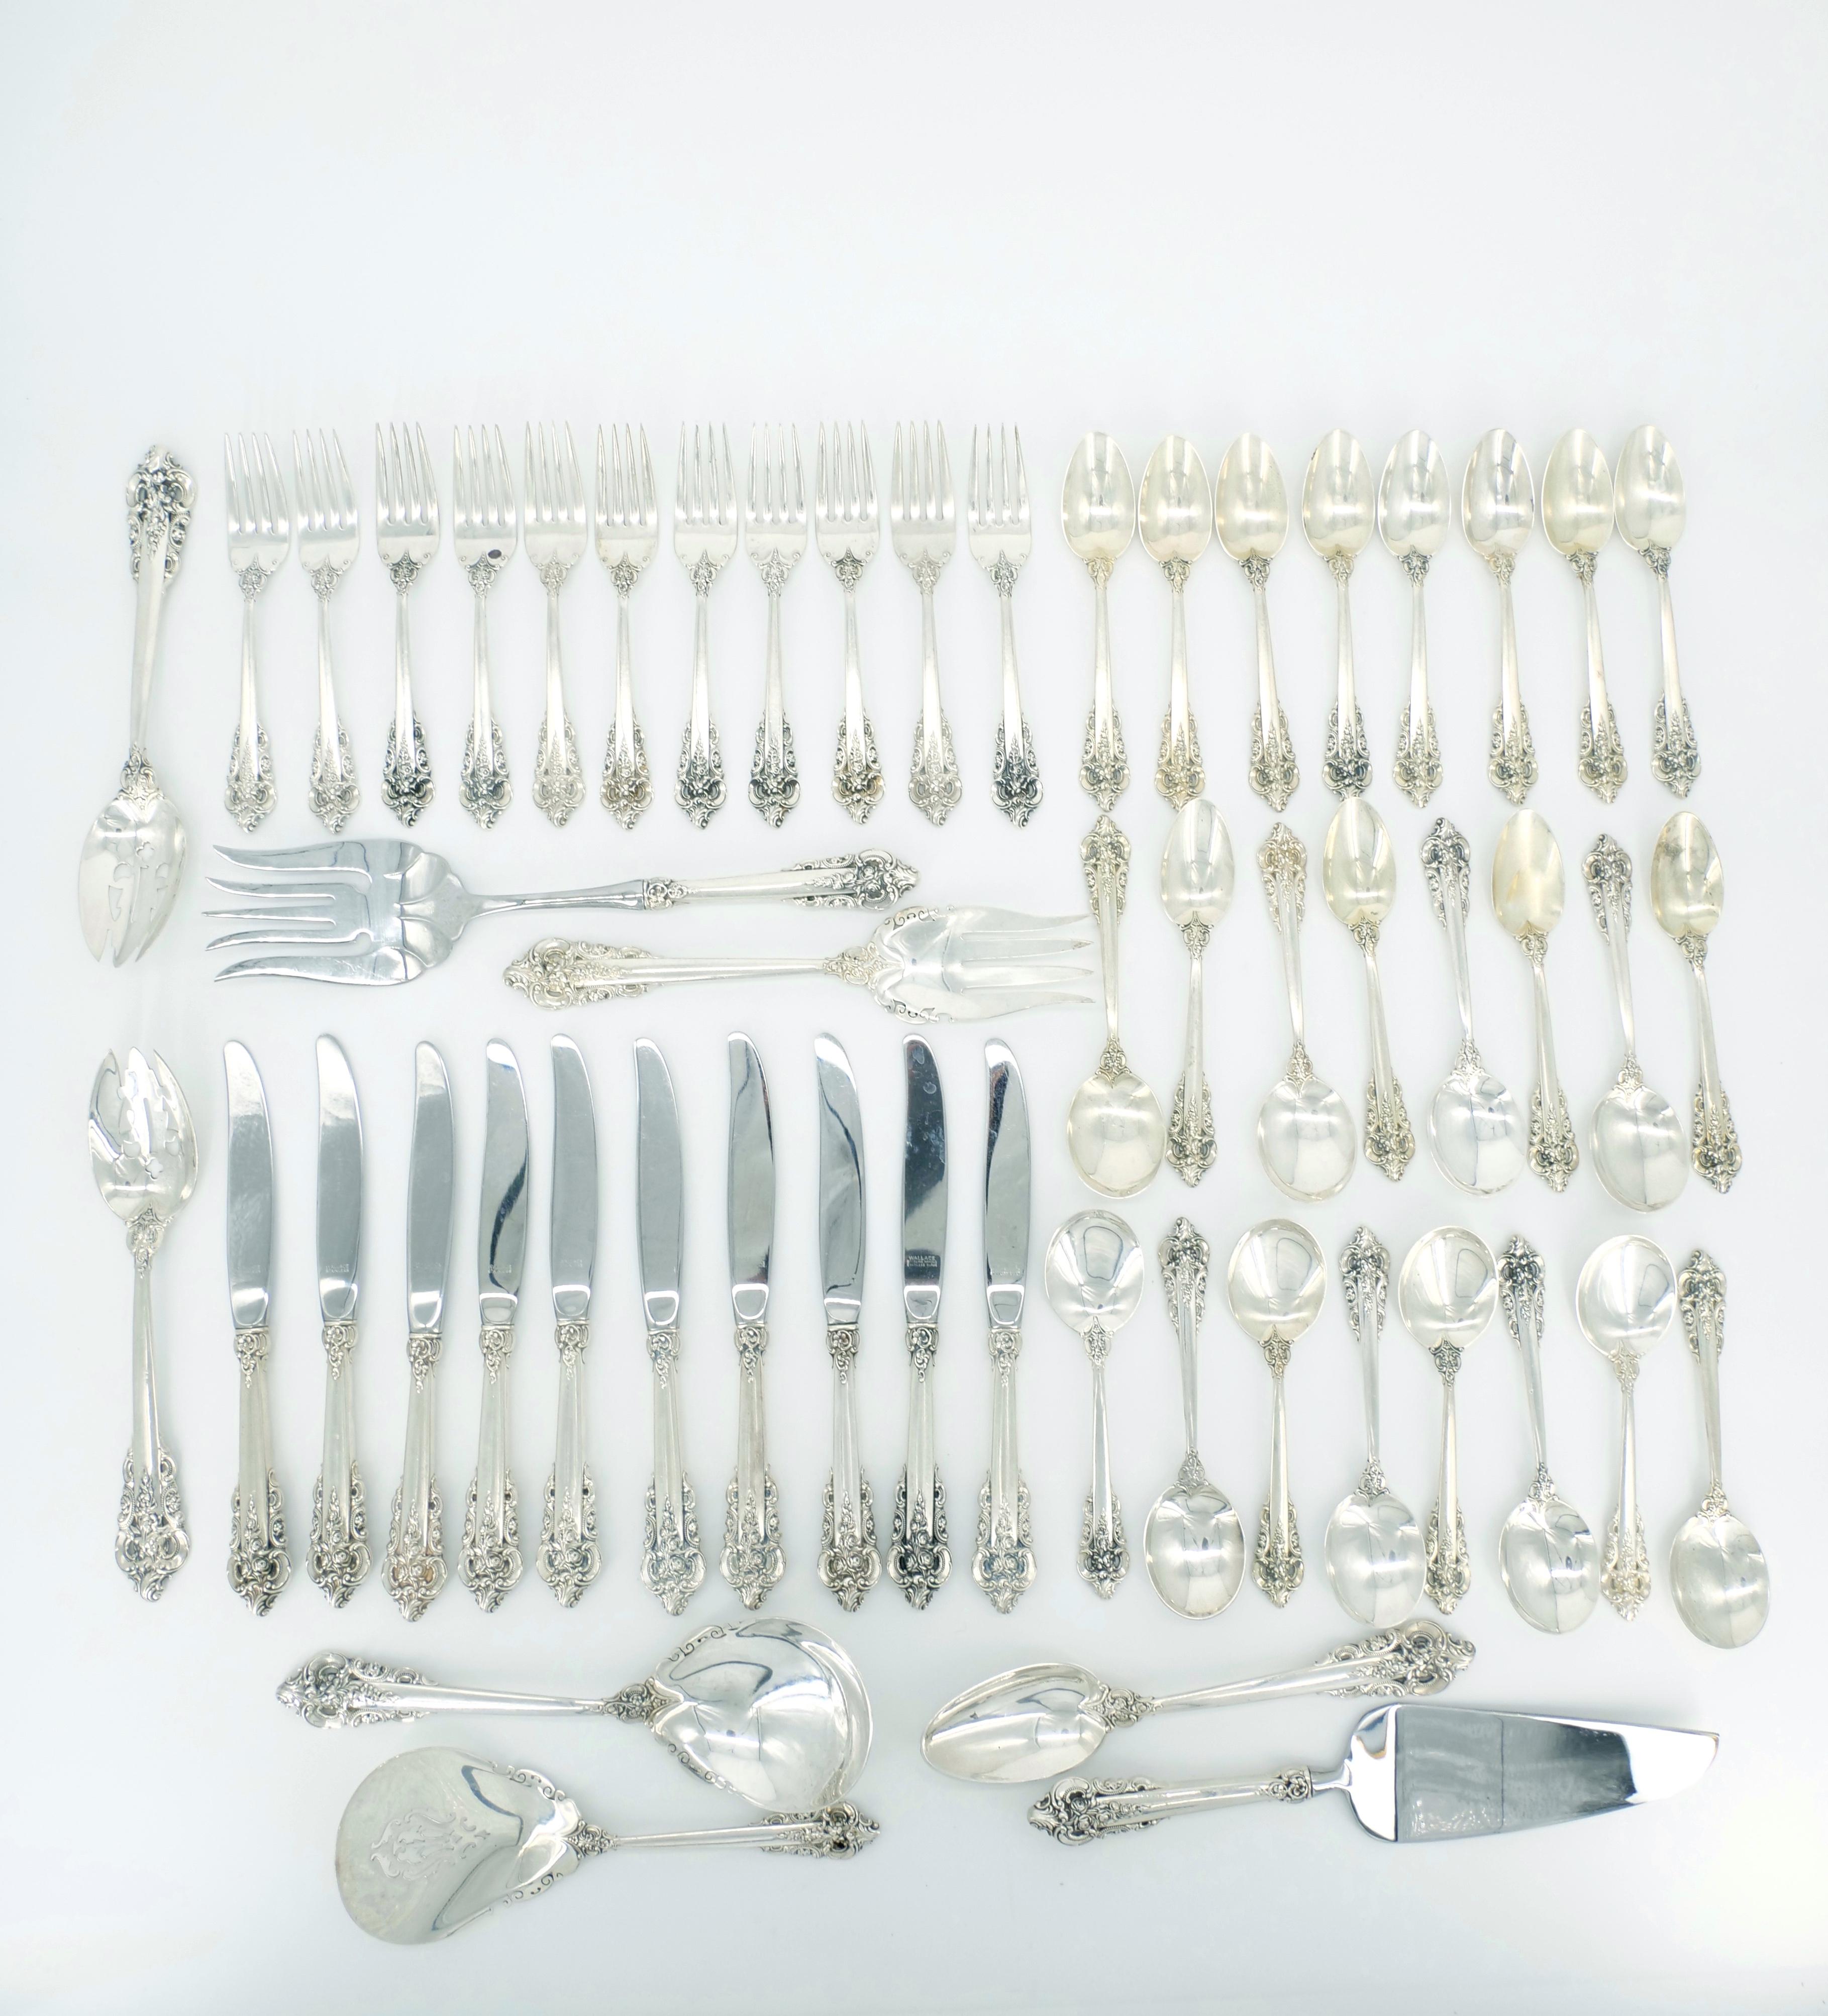 Baroque Early 20th Century Sterling Silver Flatware Service For 24 People For Sale